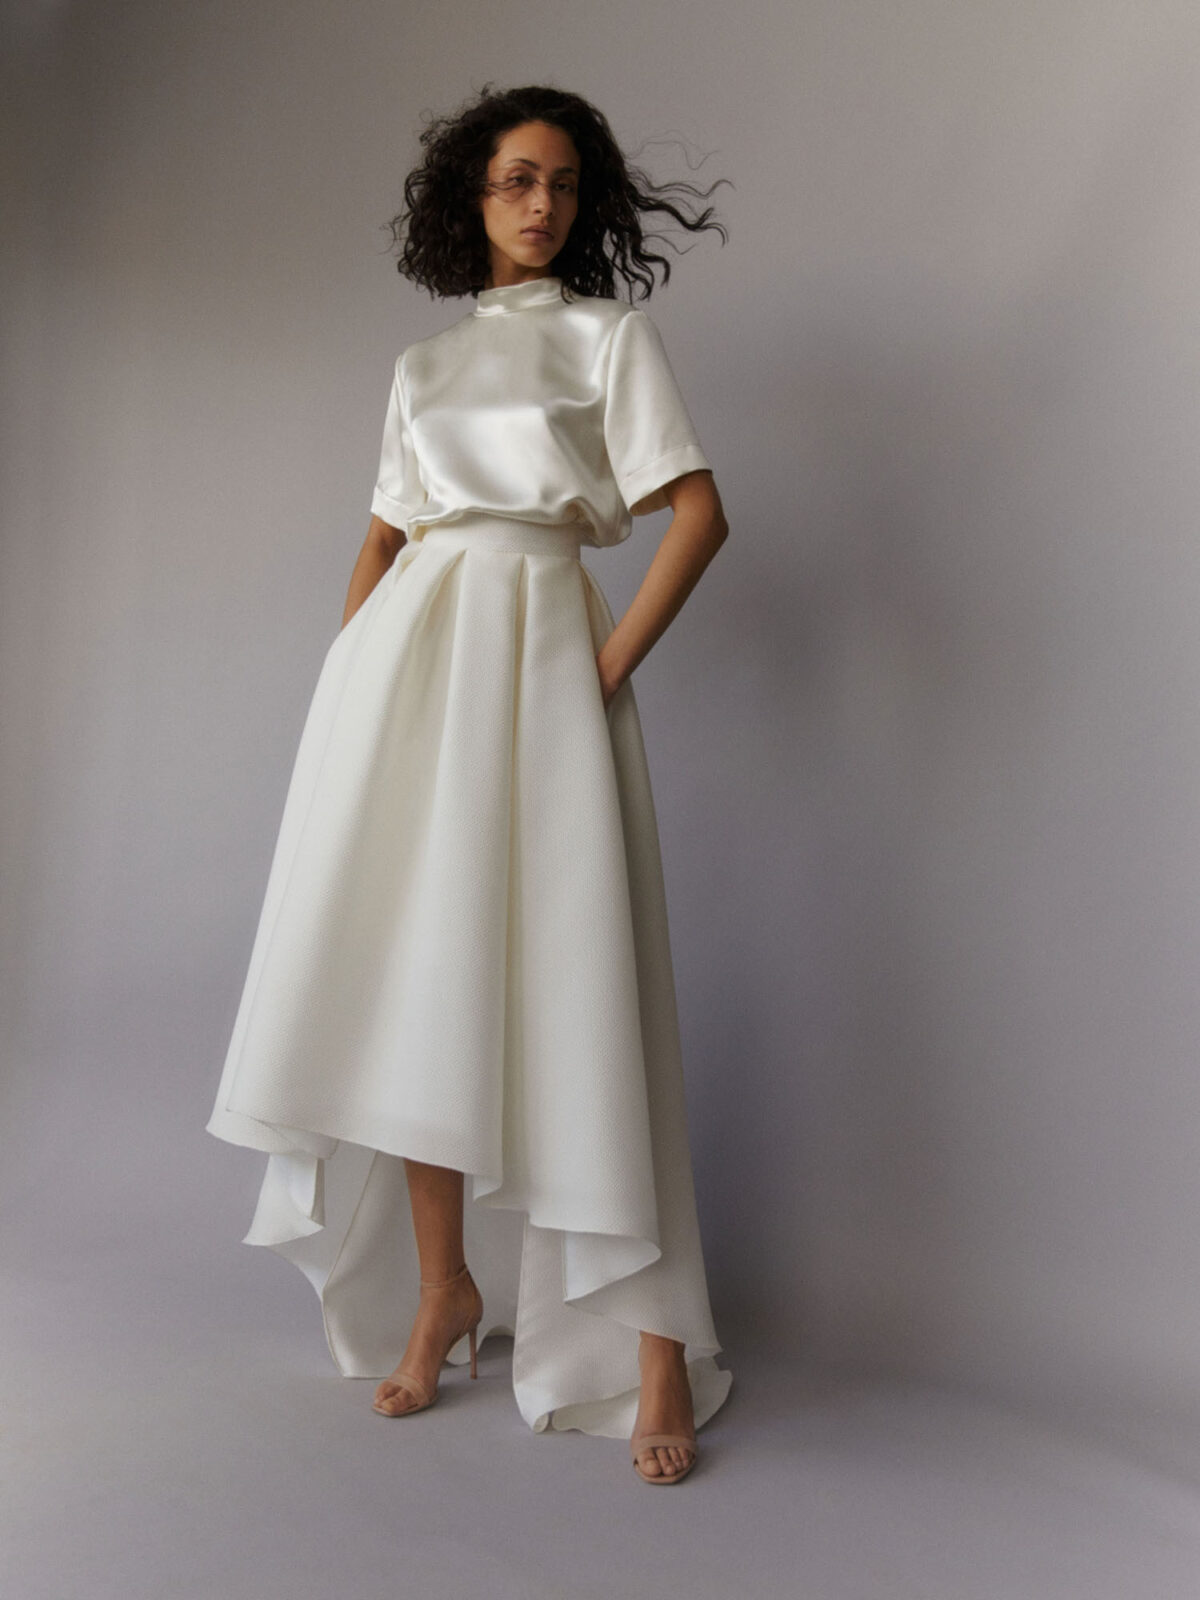 high-low wedding dress outfit; high collar top in ivory silk satin and high-low skirt in jacquard gazar